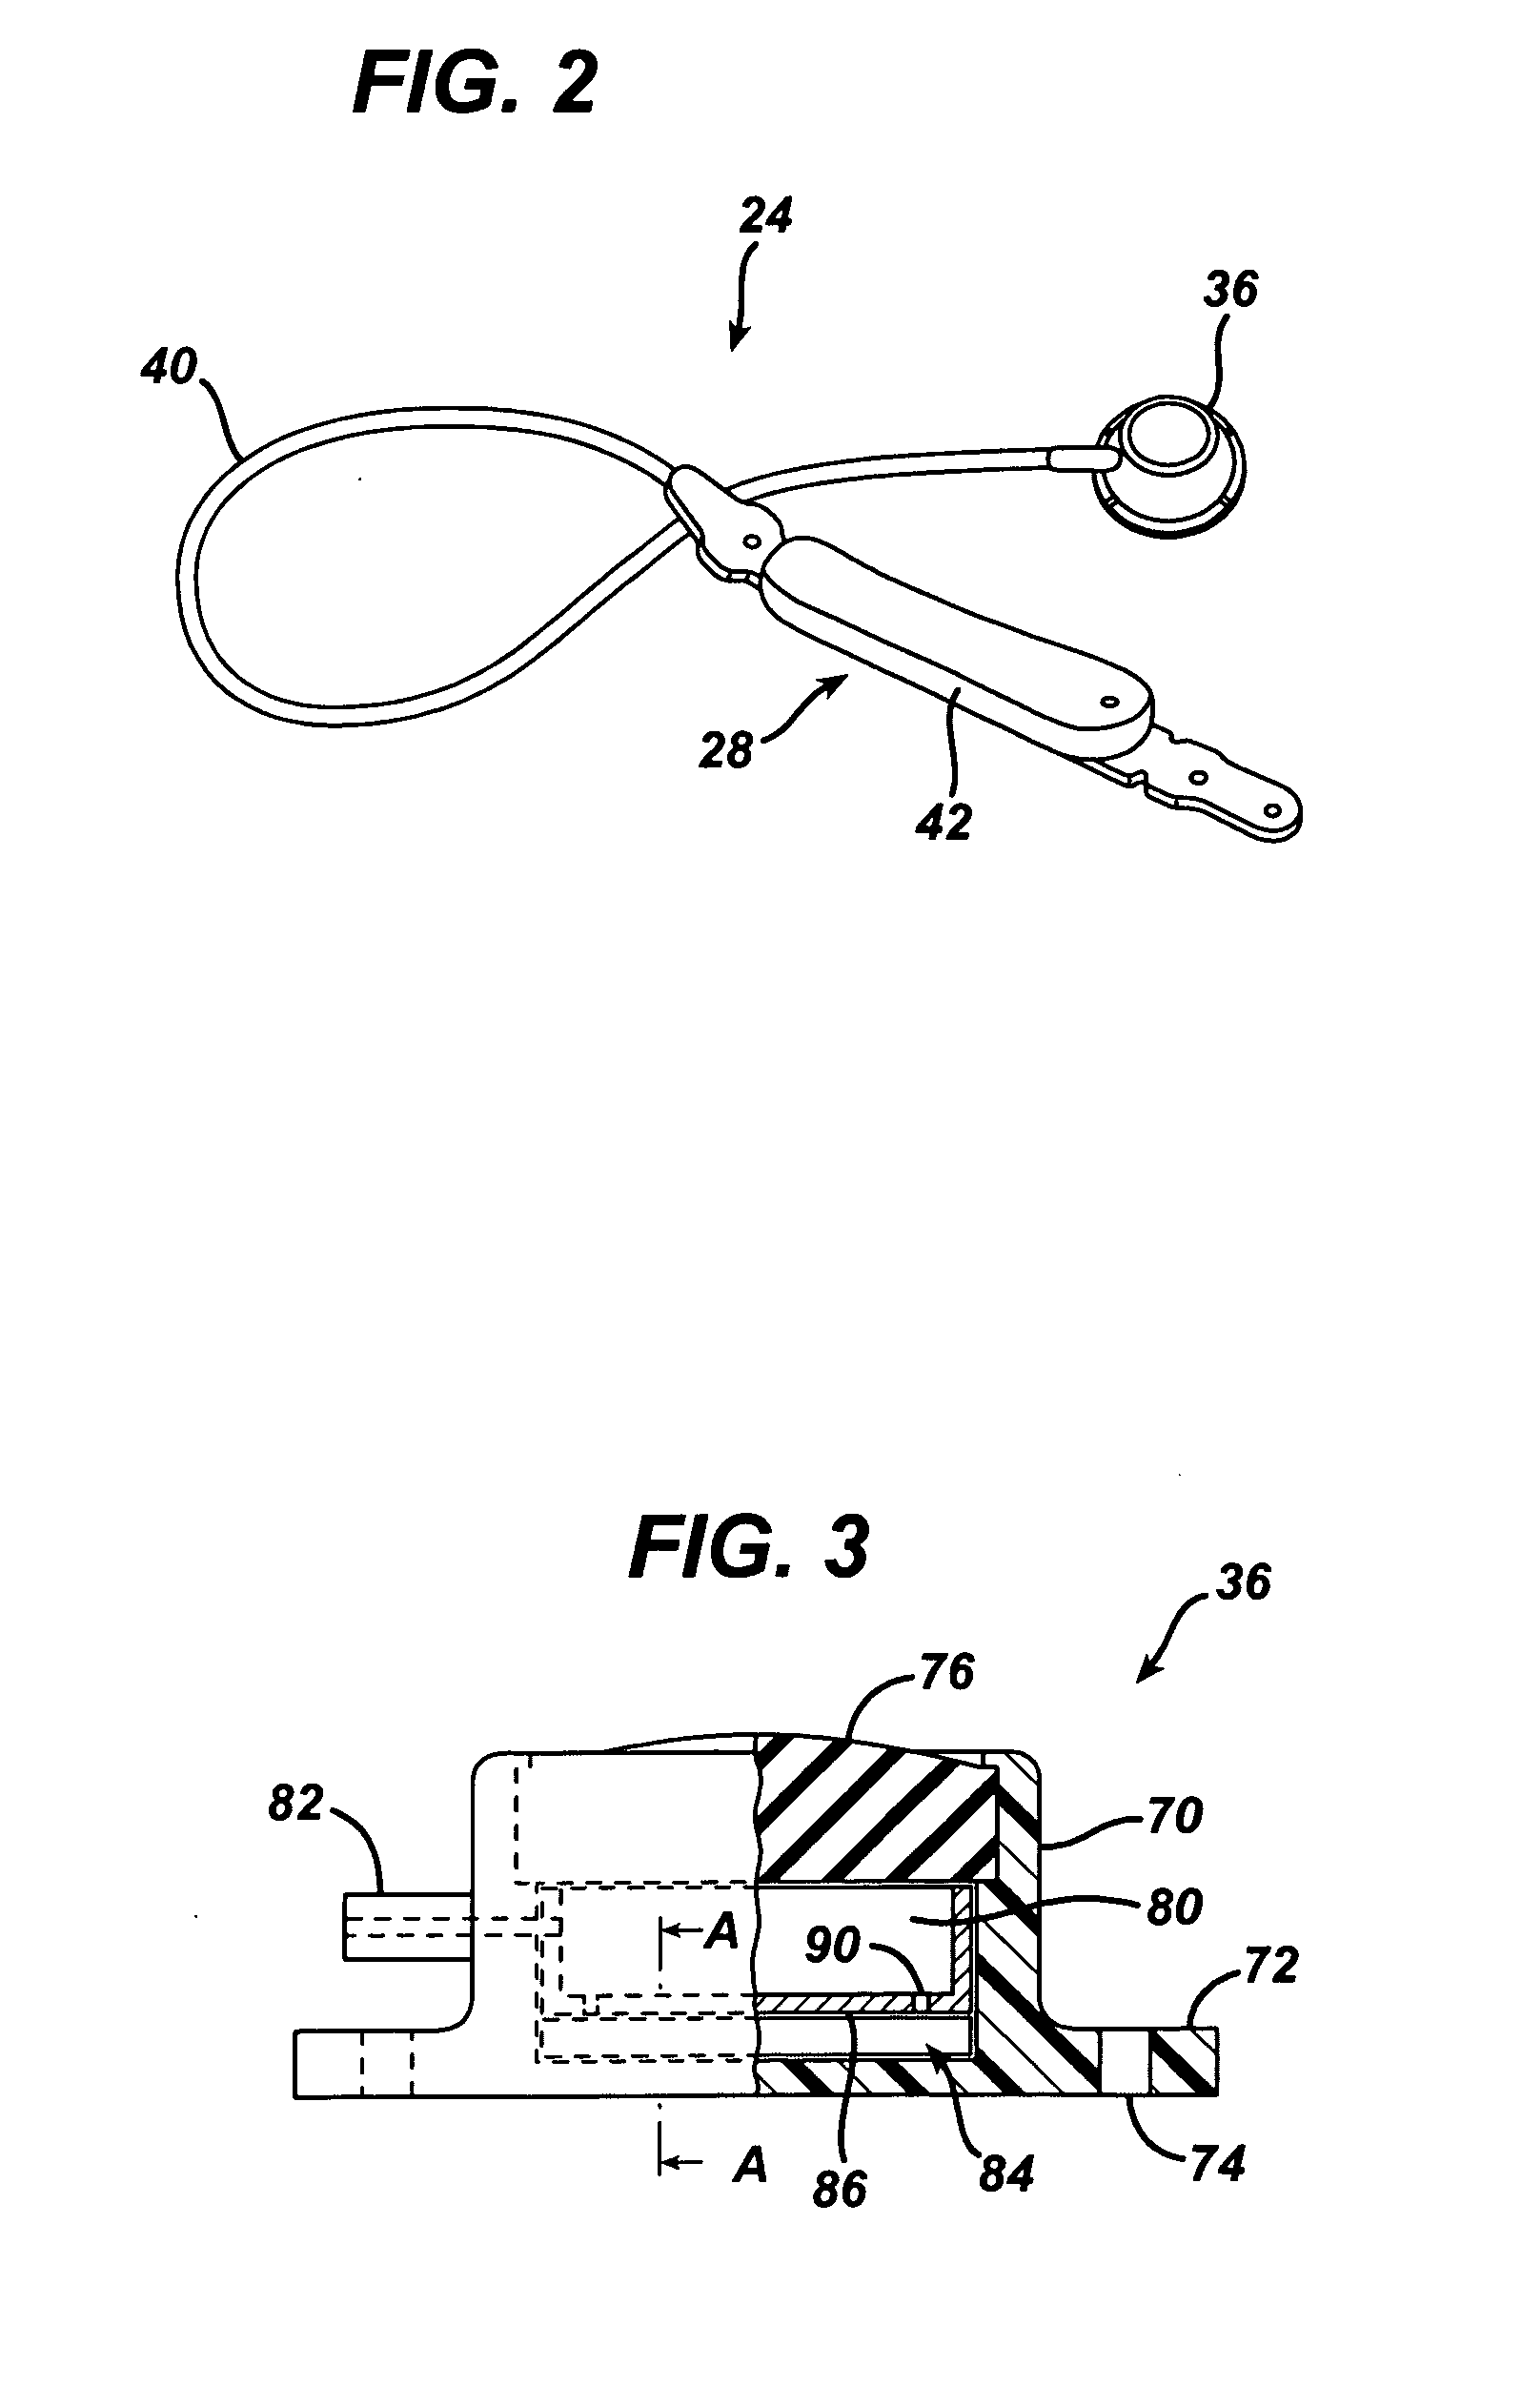 GUI for an Implantable Restriction Device and a Data Logger